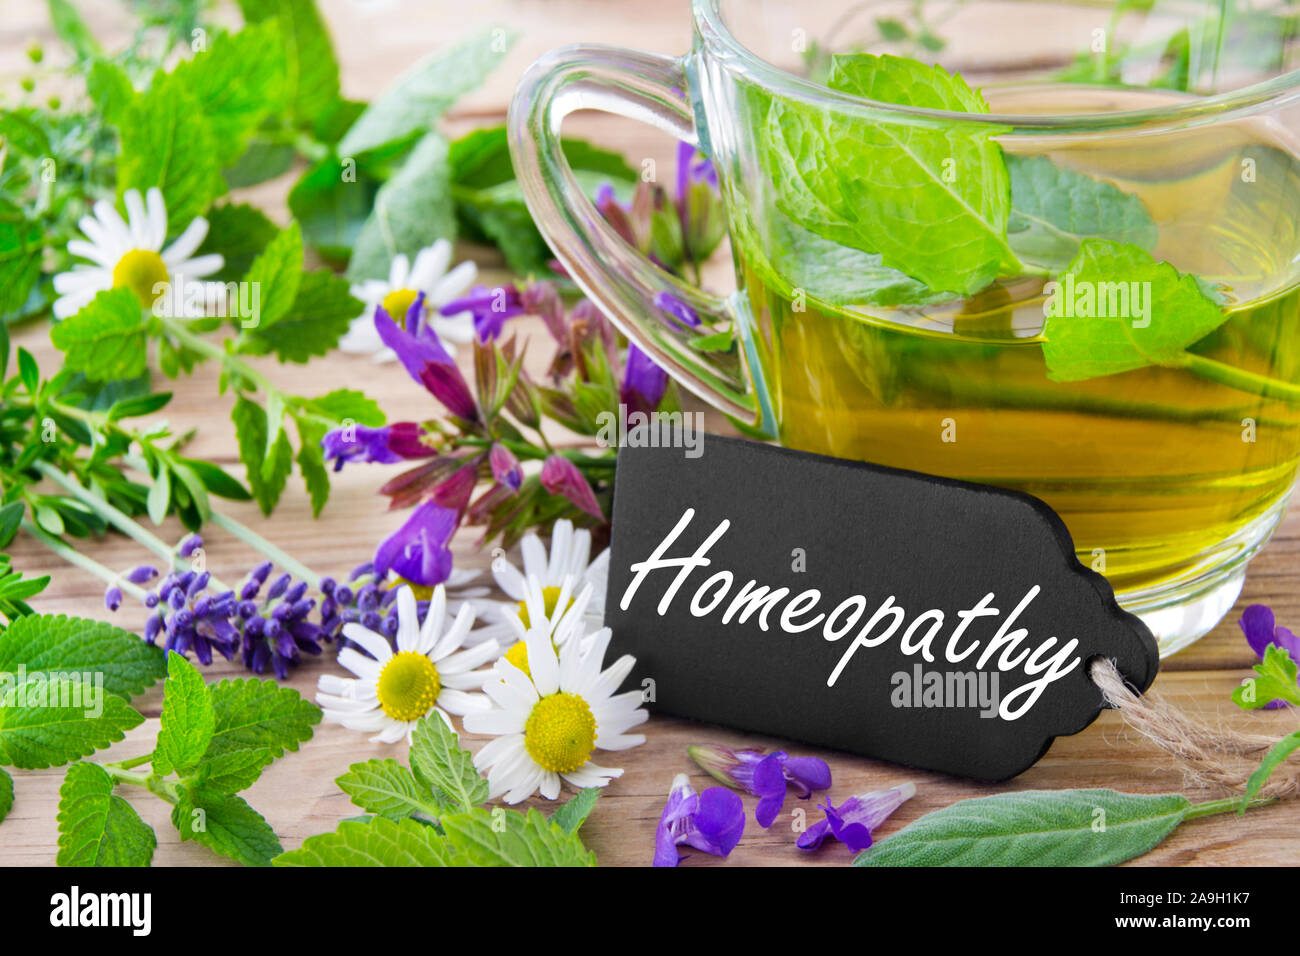 Herbal tea and homeopathy label Stock Photo